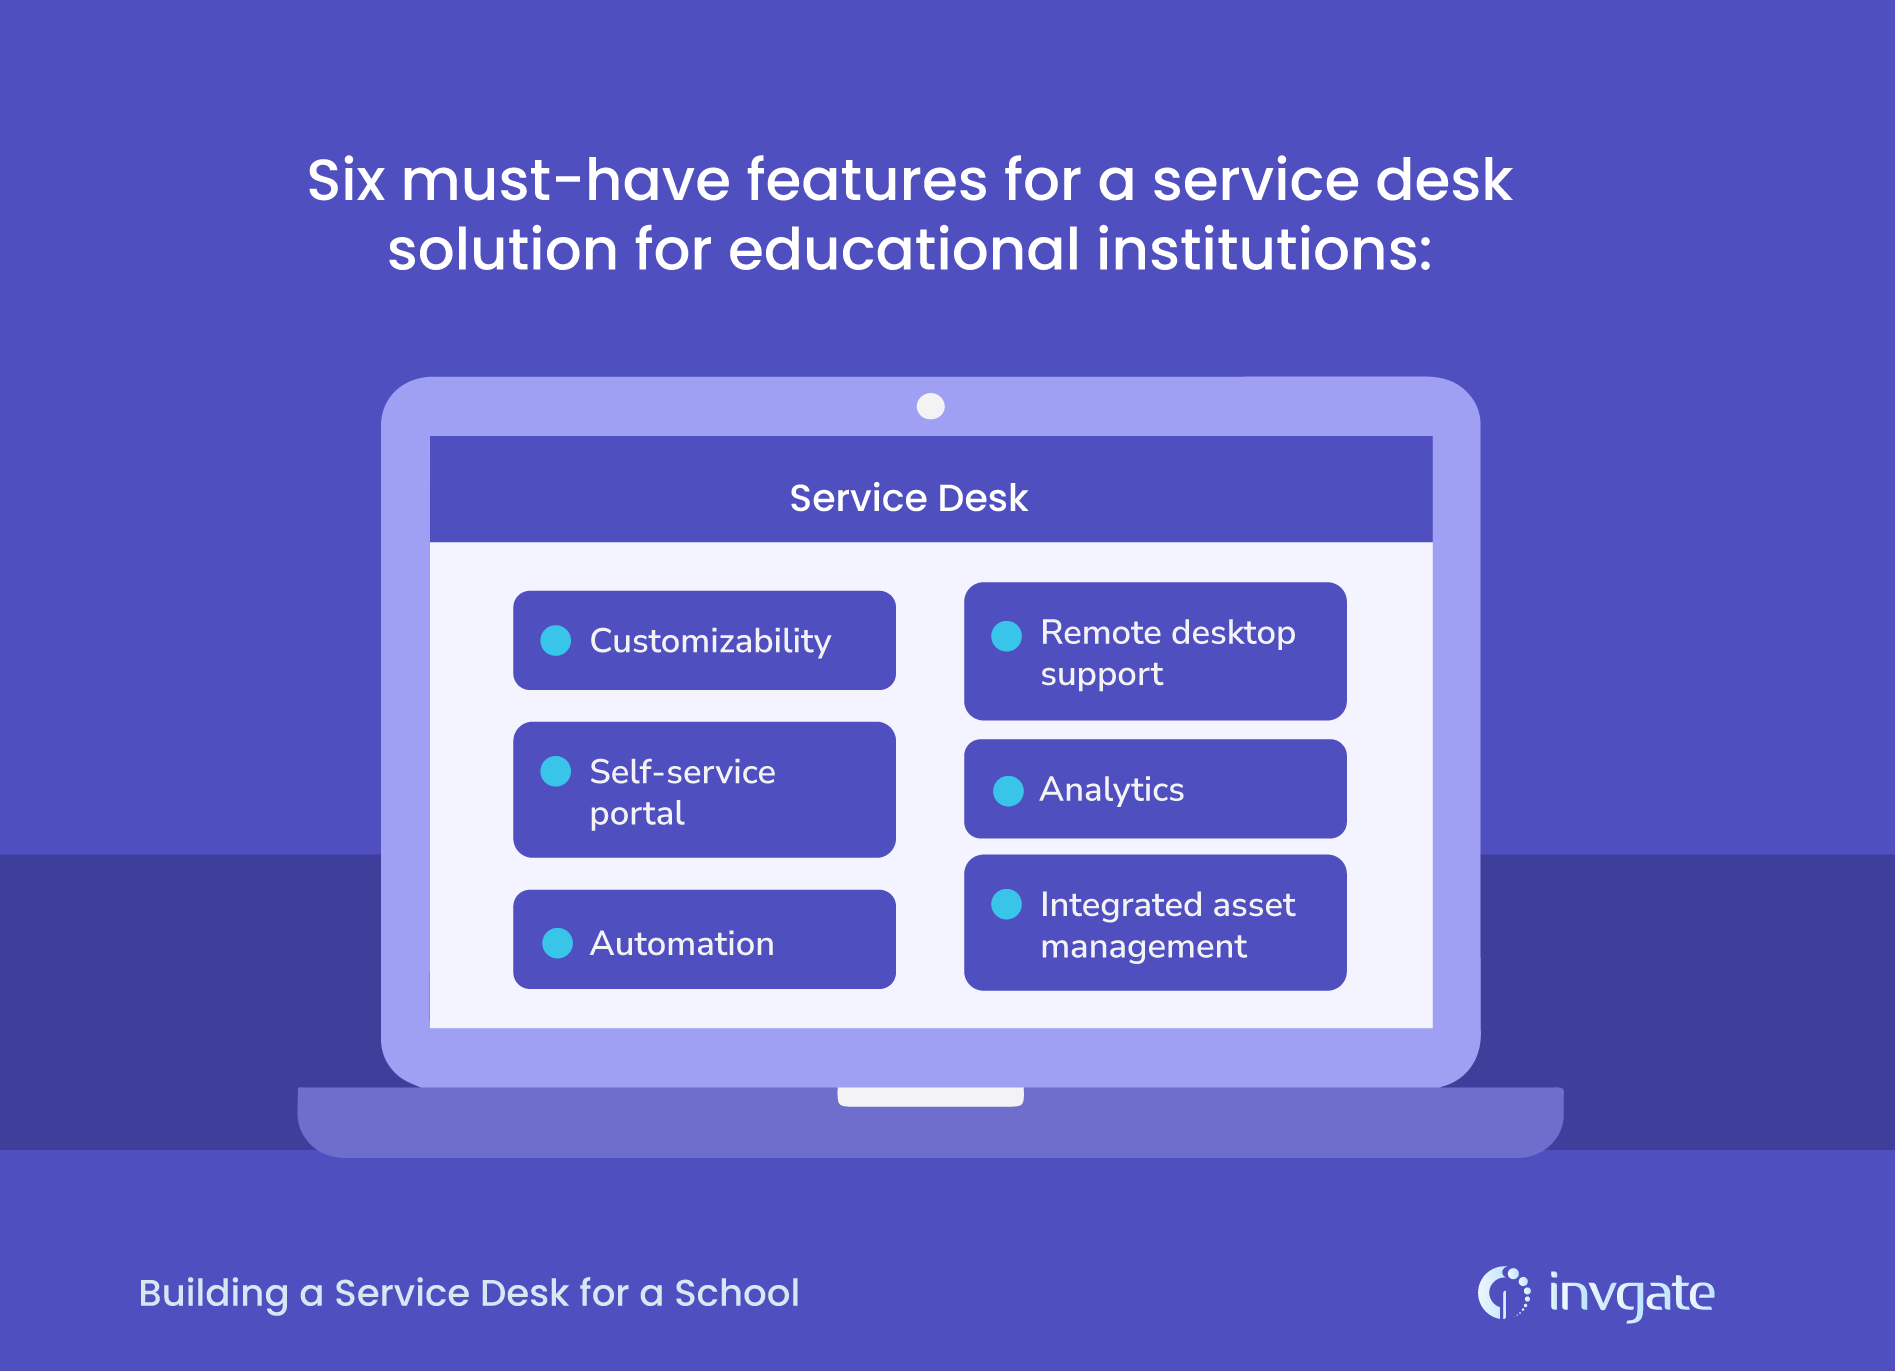 Help desk software for schools should be designed with educational institutions in mind.